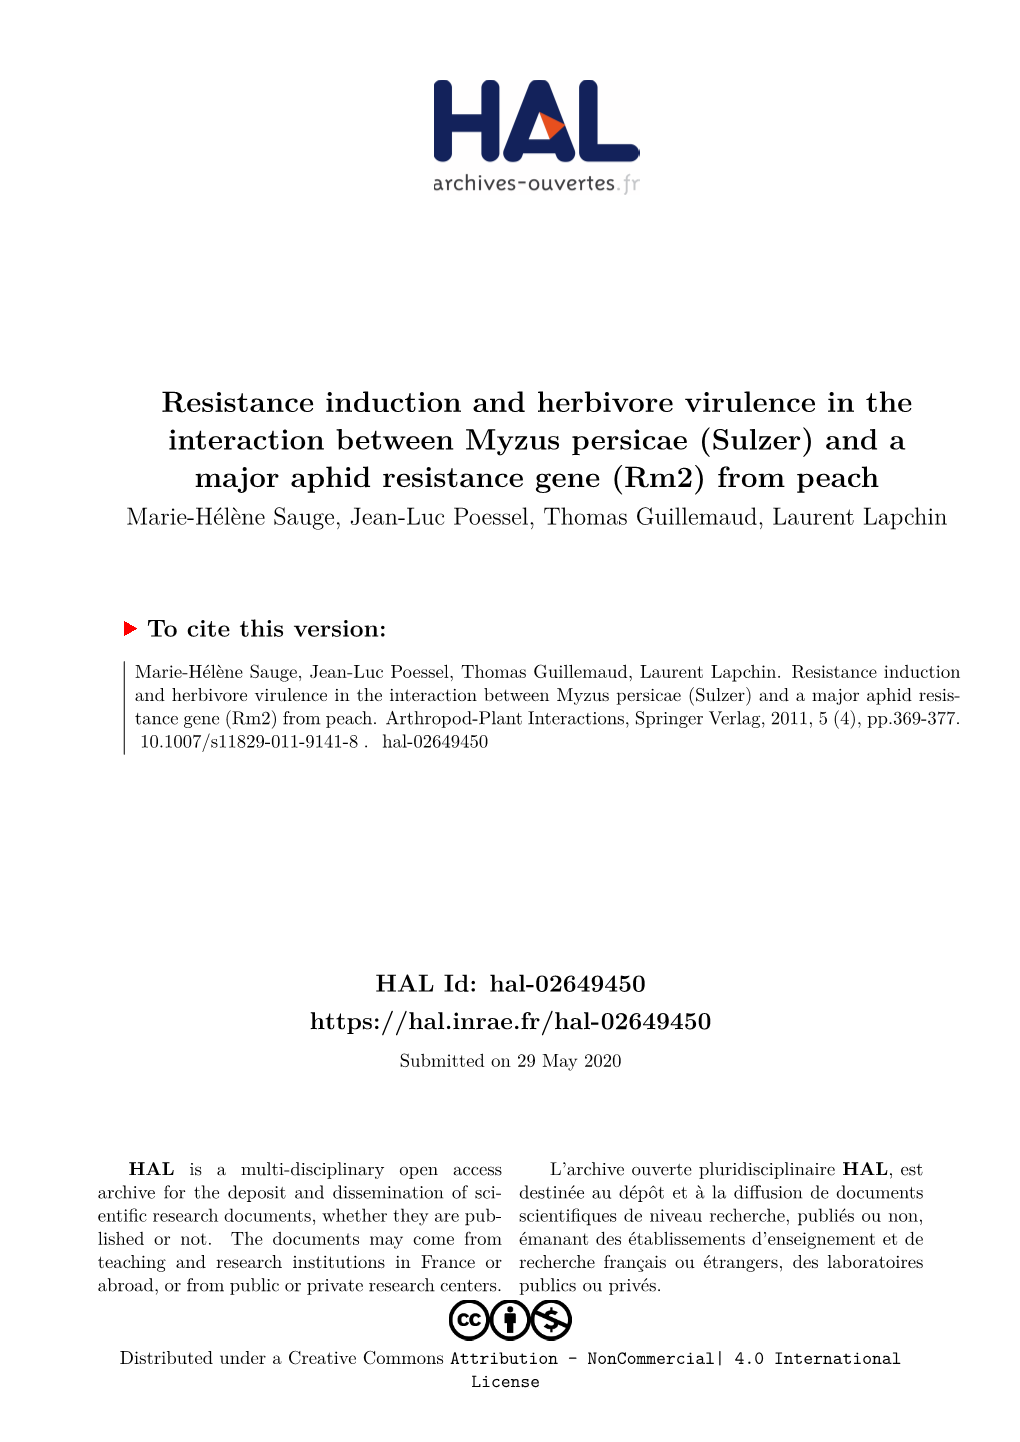 Resistance Induction and Herbivore Virulence in the Interaction Between